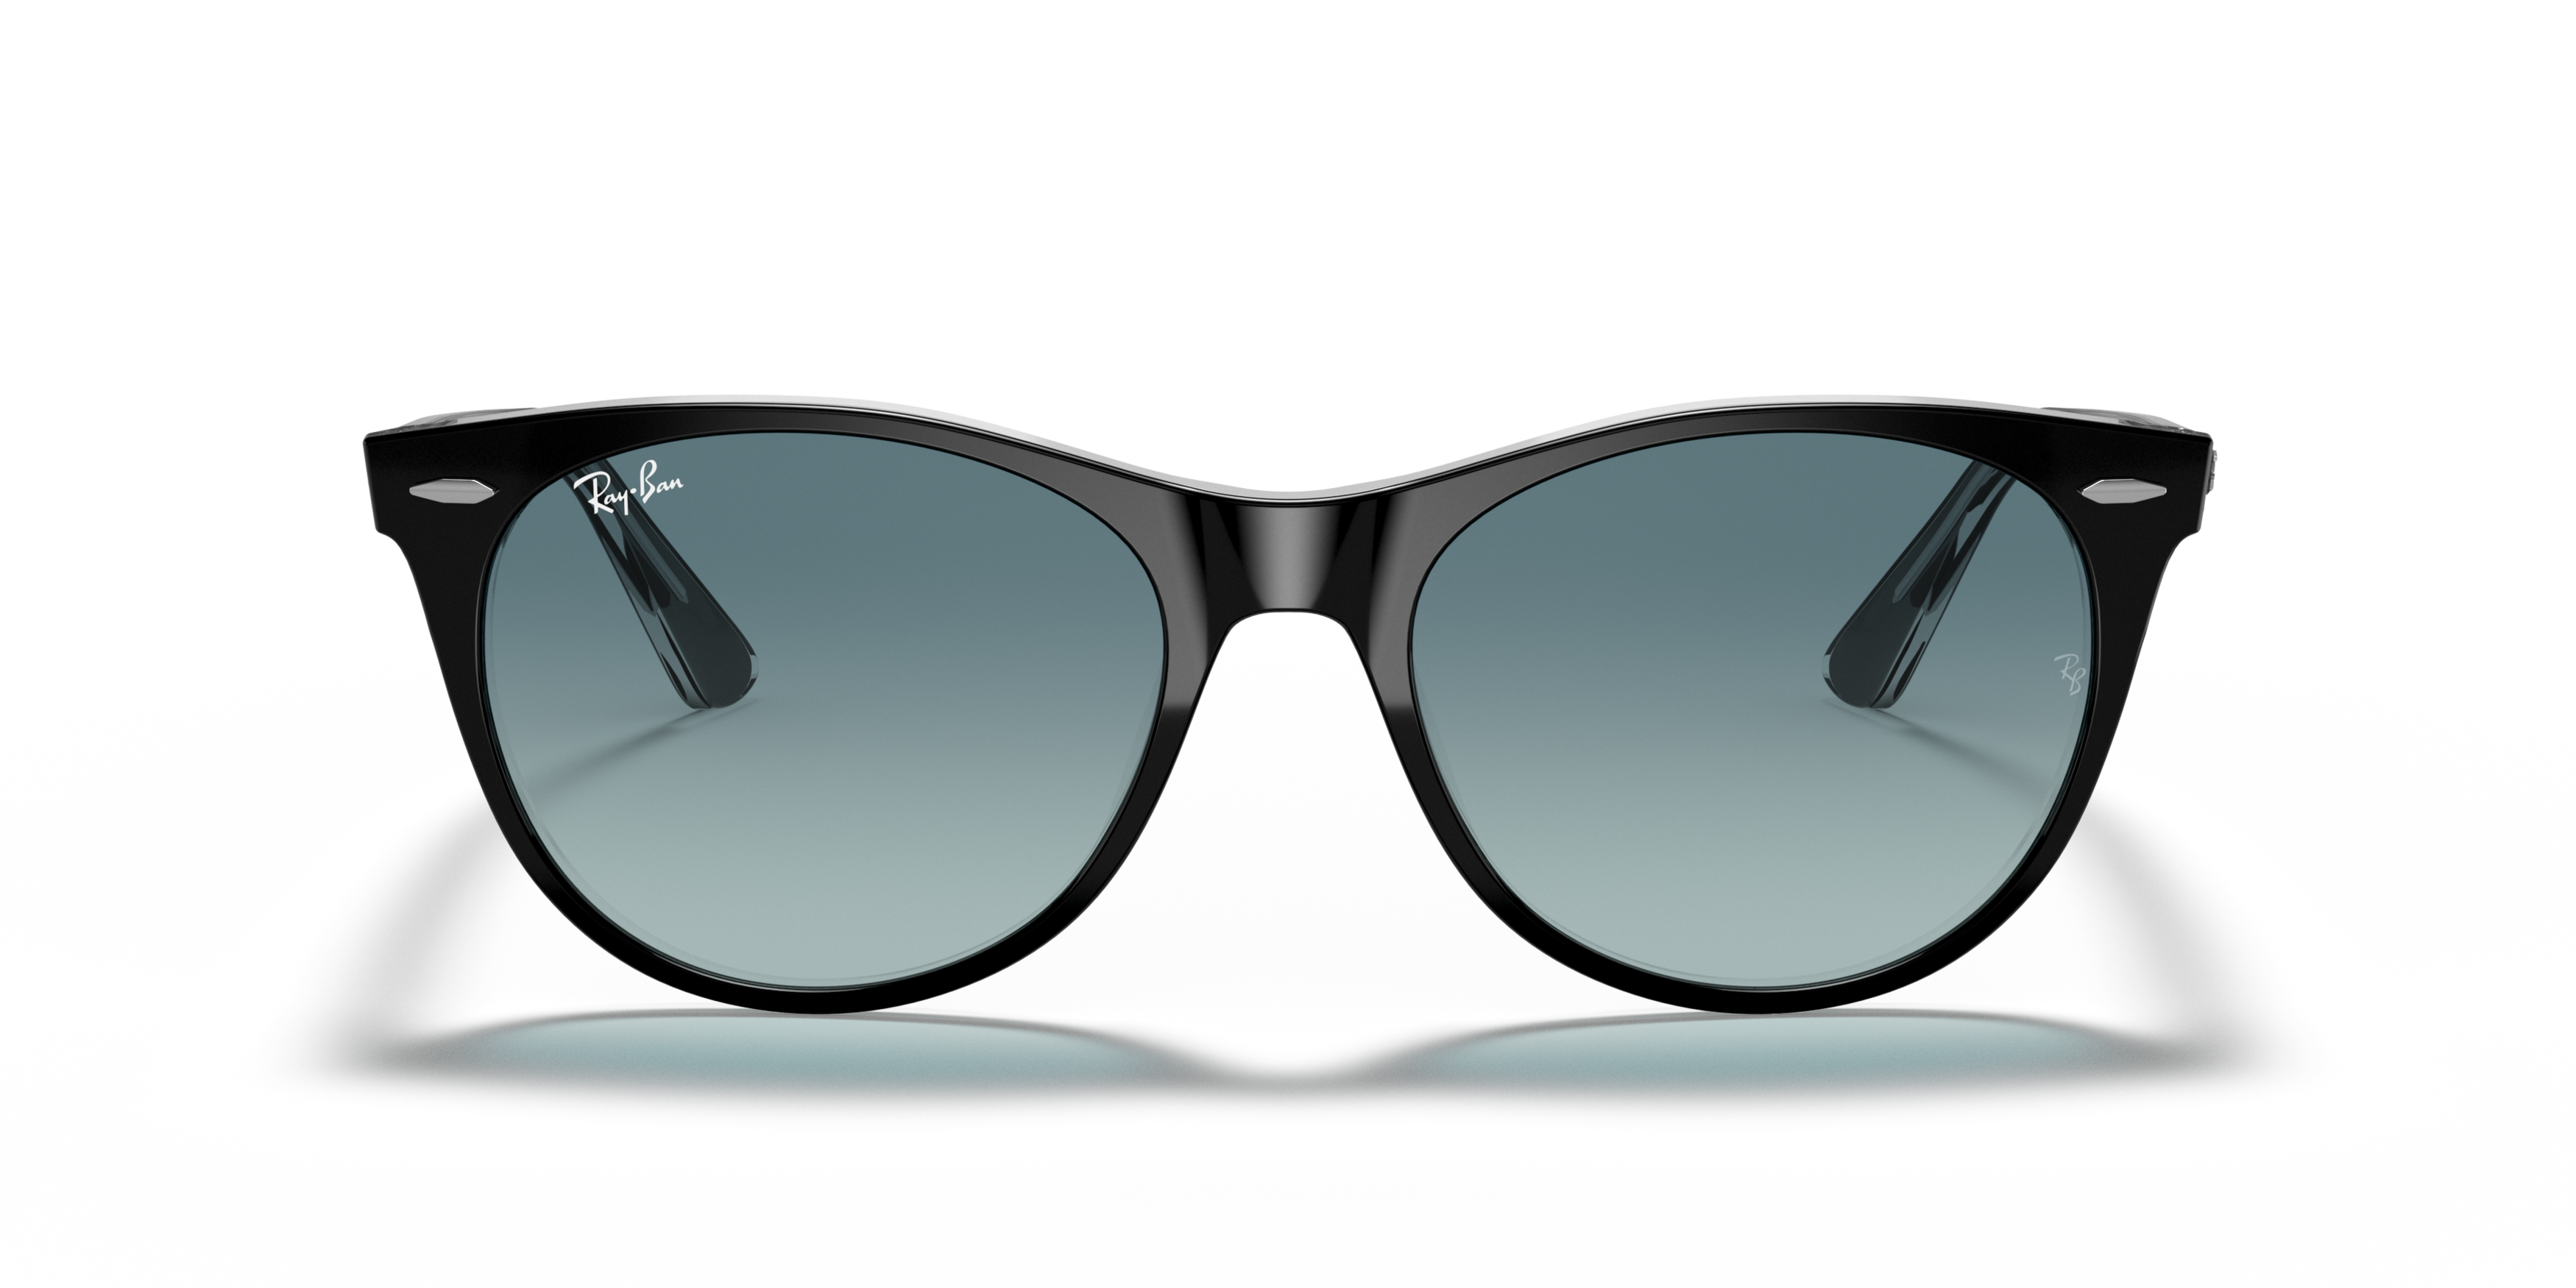 [products.image.front] Ray-Ban Wayfarer II RB2185 12943M